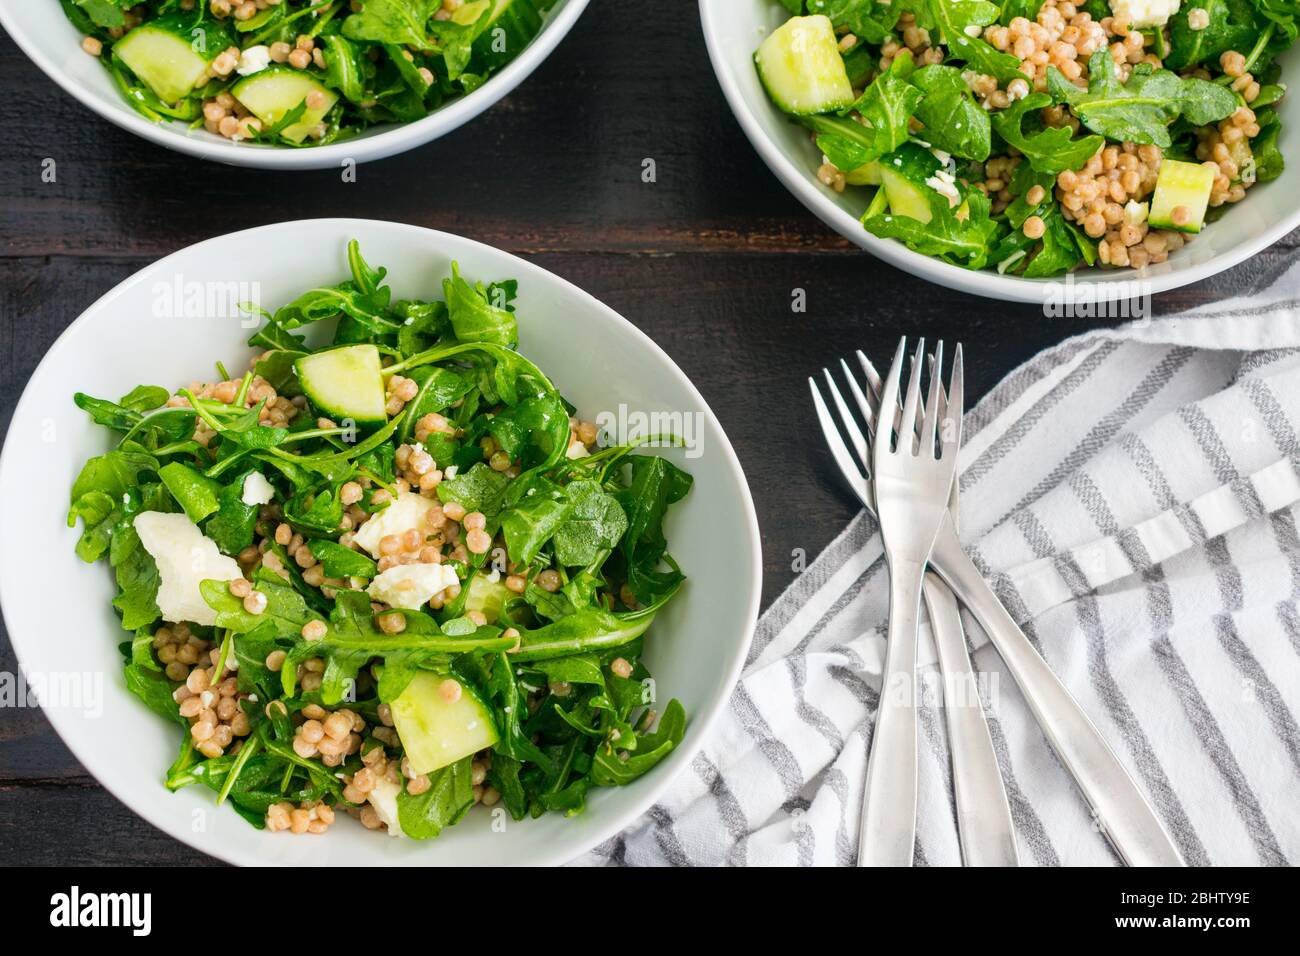 Lemony Arugula Salad with Couscous, Cucumbers, and Feta: Arugula salad with chunks of cucumber, feta cheese crumbles, and whole wheat pearl couscous Stock Photo